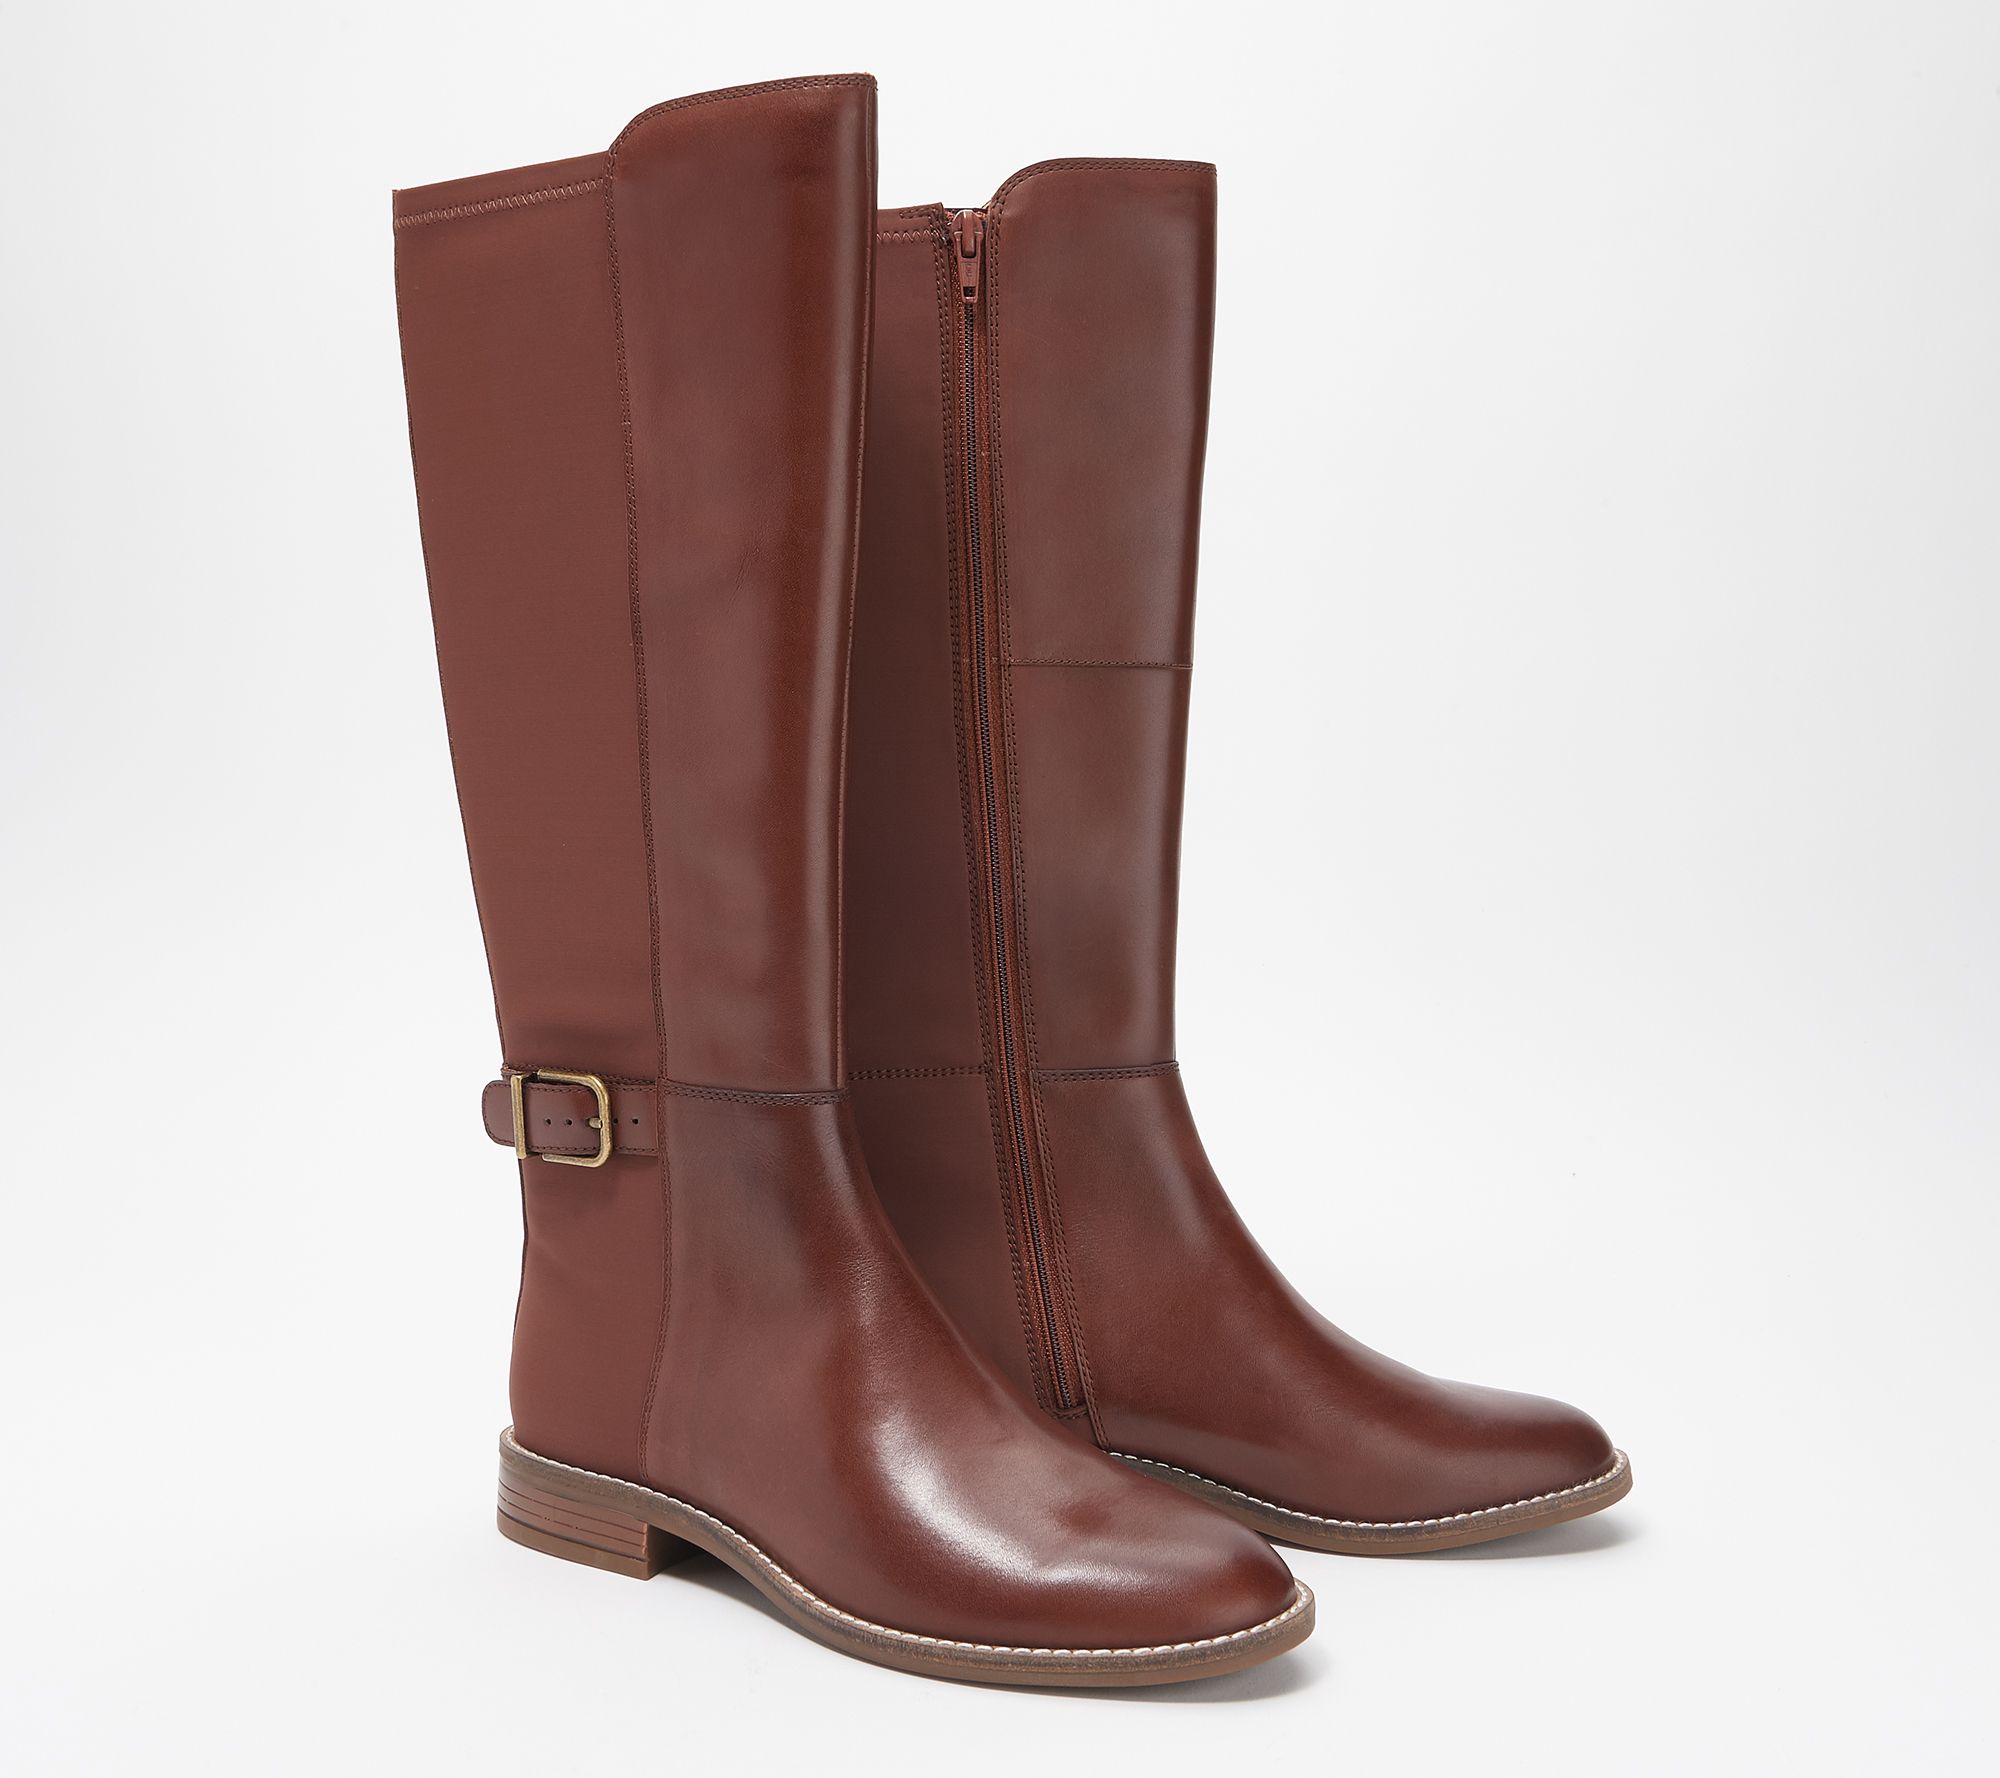 Wide Leather Boots - Camzin Tree - QVC.com